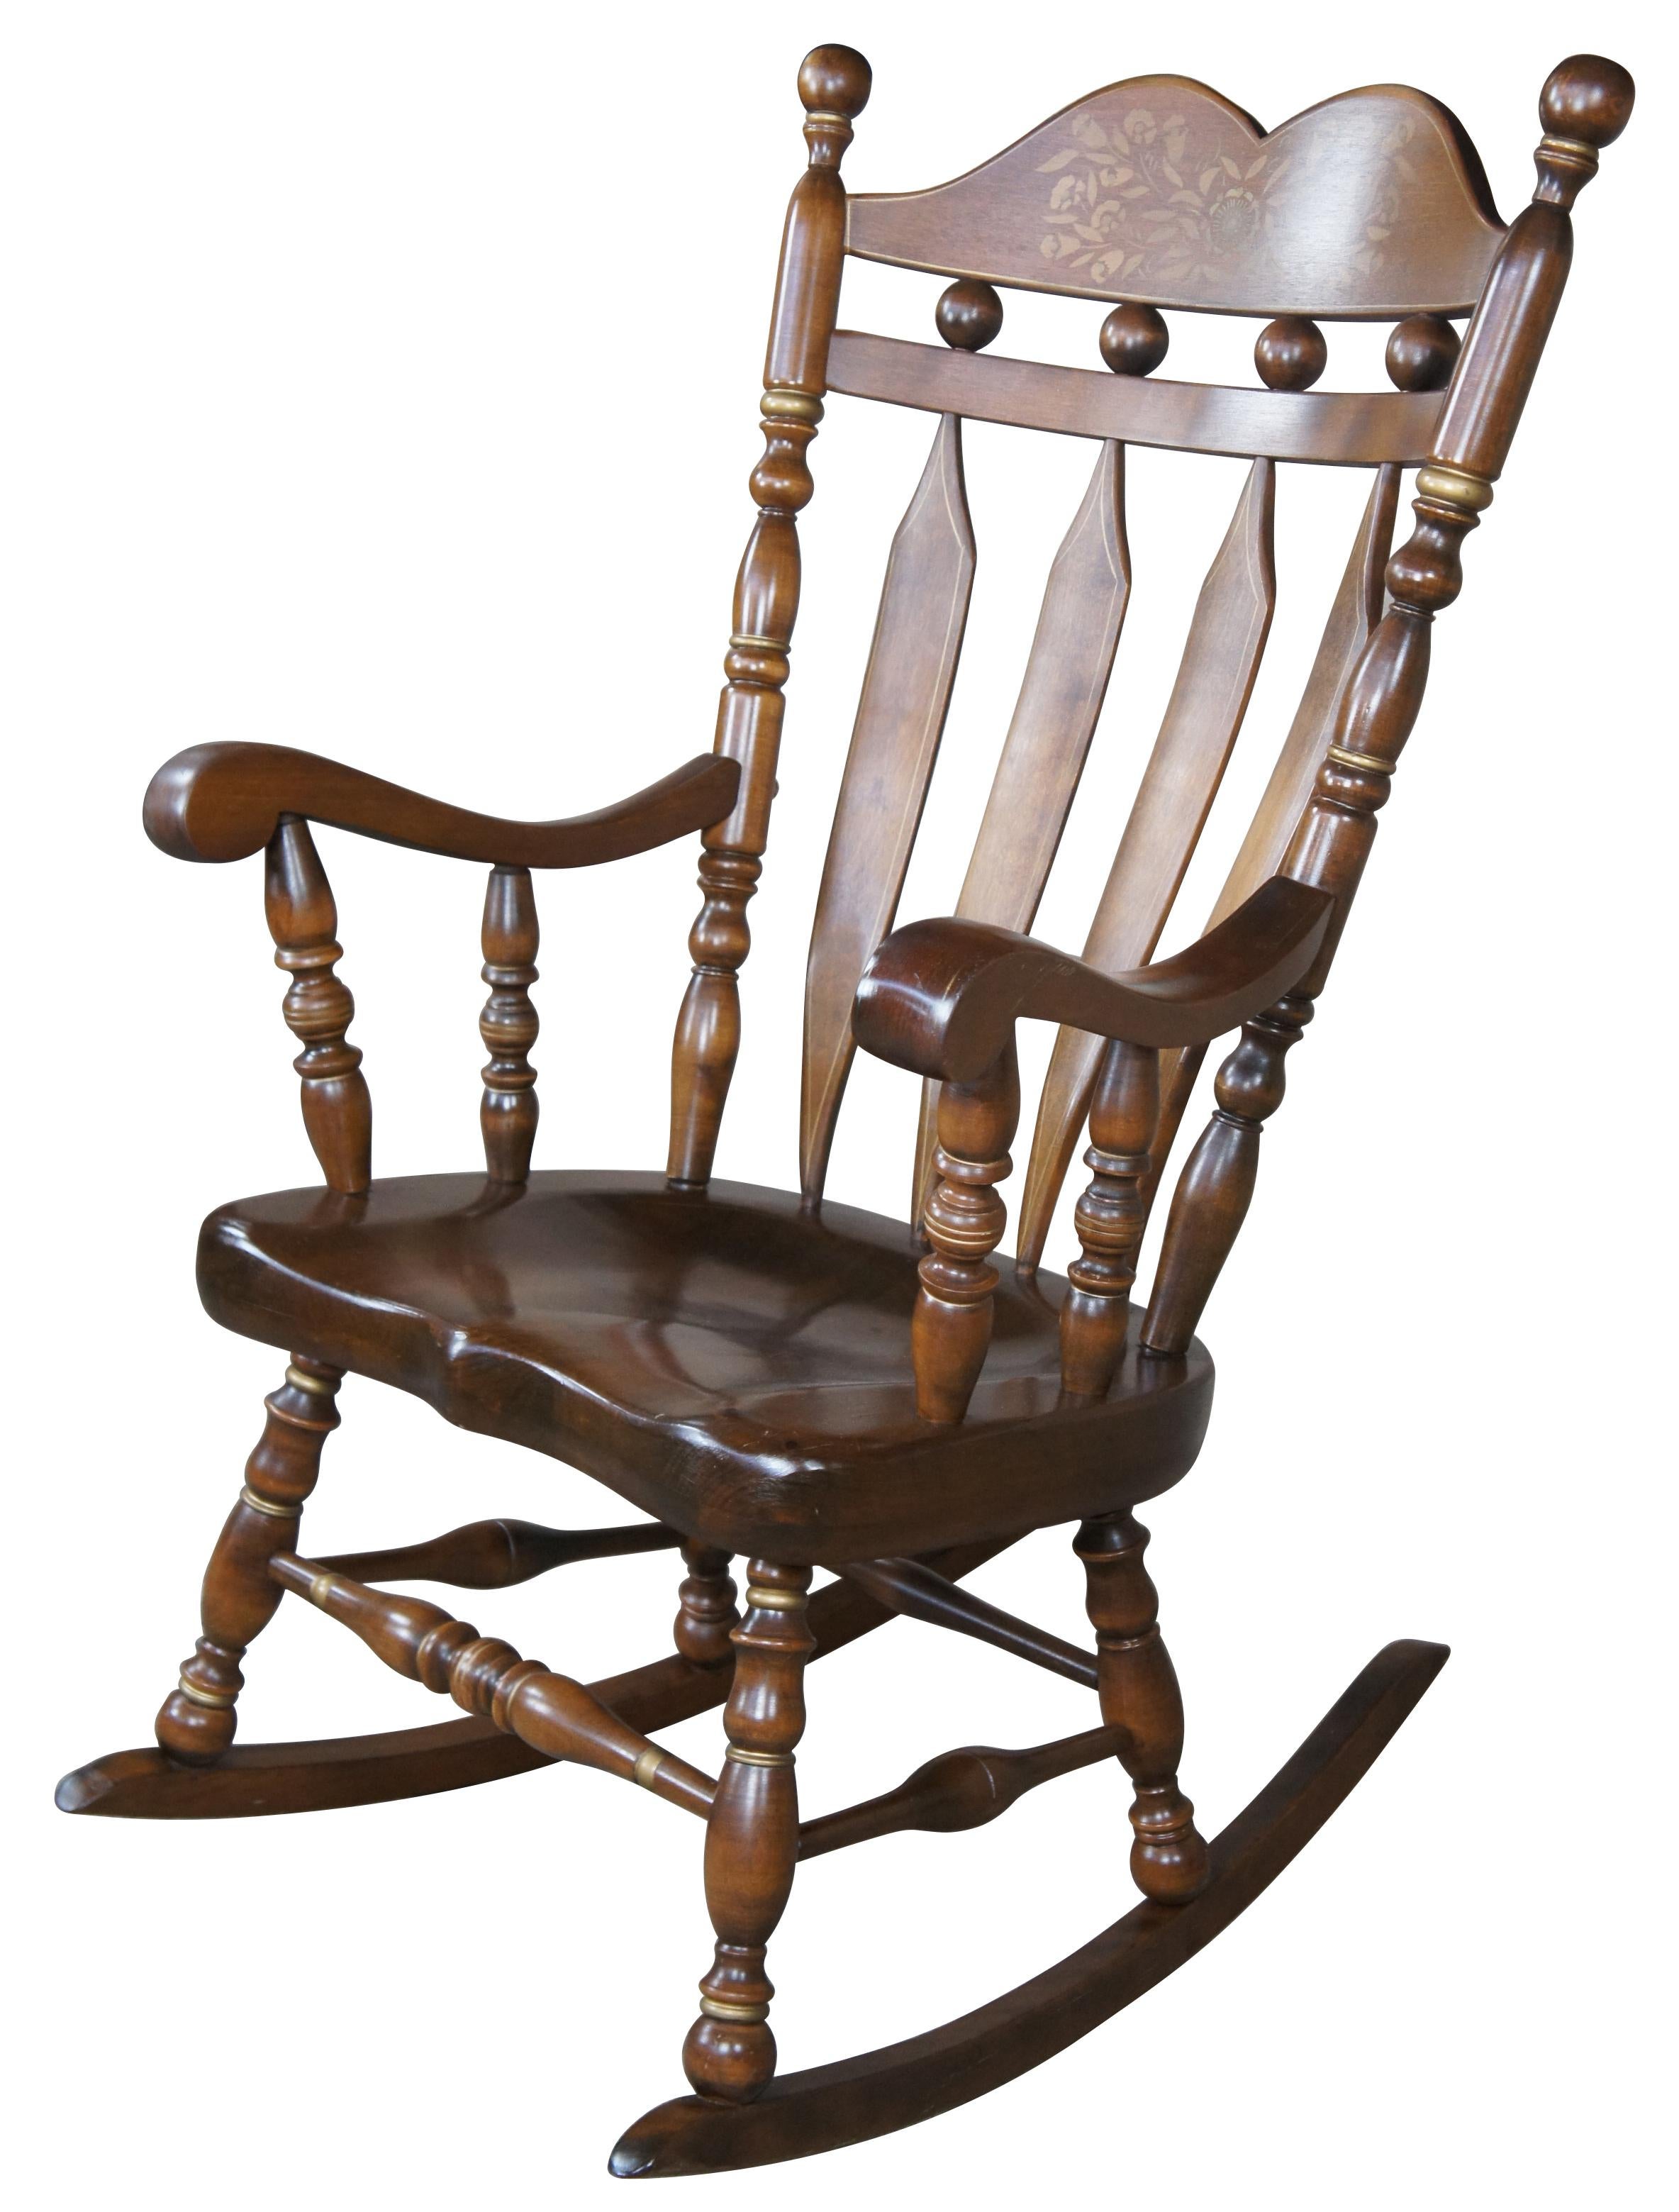 Vintage Ethan Allen Antique Old Tavern Pine Decorated Rocker No 12-9019, Circa 1971. Made from maple and pine with a deep saddled seat and stenciled floral back. Reminiscent of Hitchcock styling.